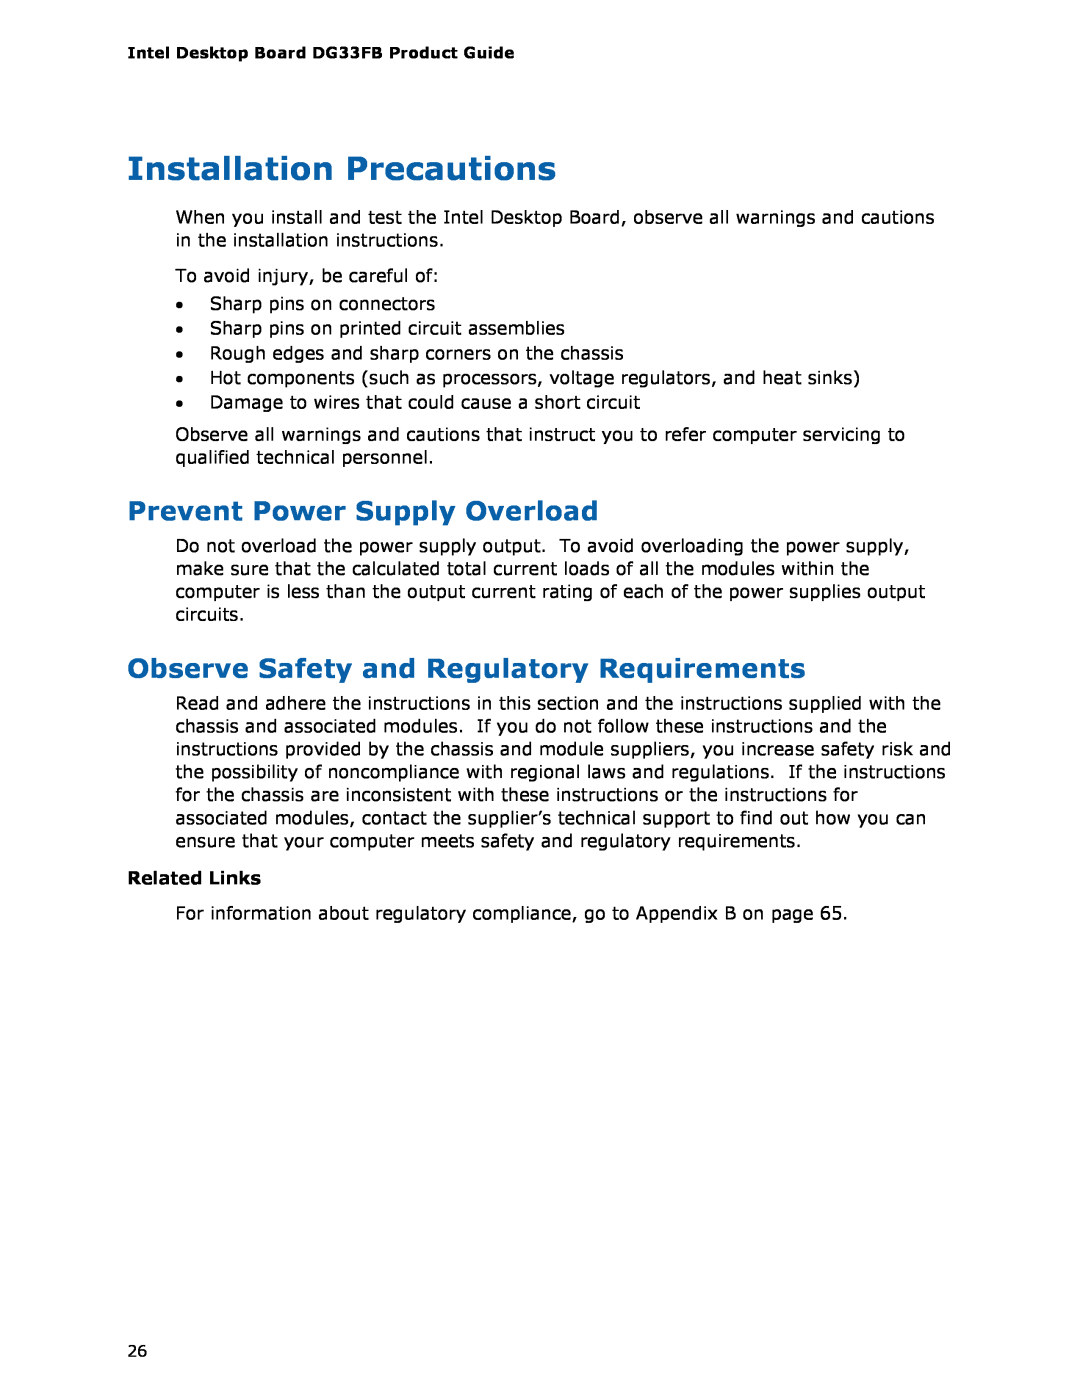 Intel DG33FB manual Installation Precautions, Prevent Power Supply Overload, Observe Safety and Regulatory Requirements 